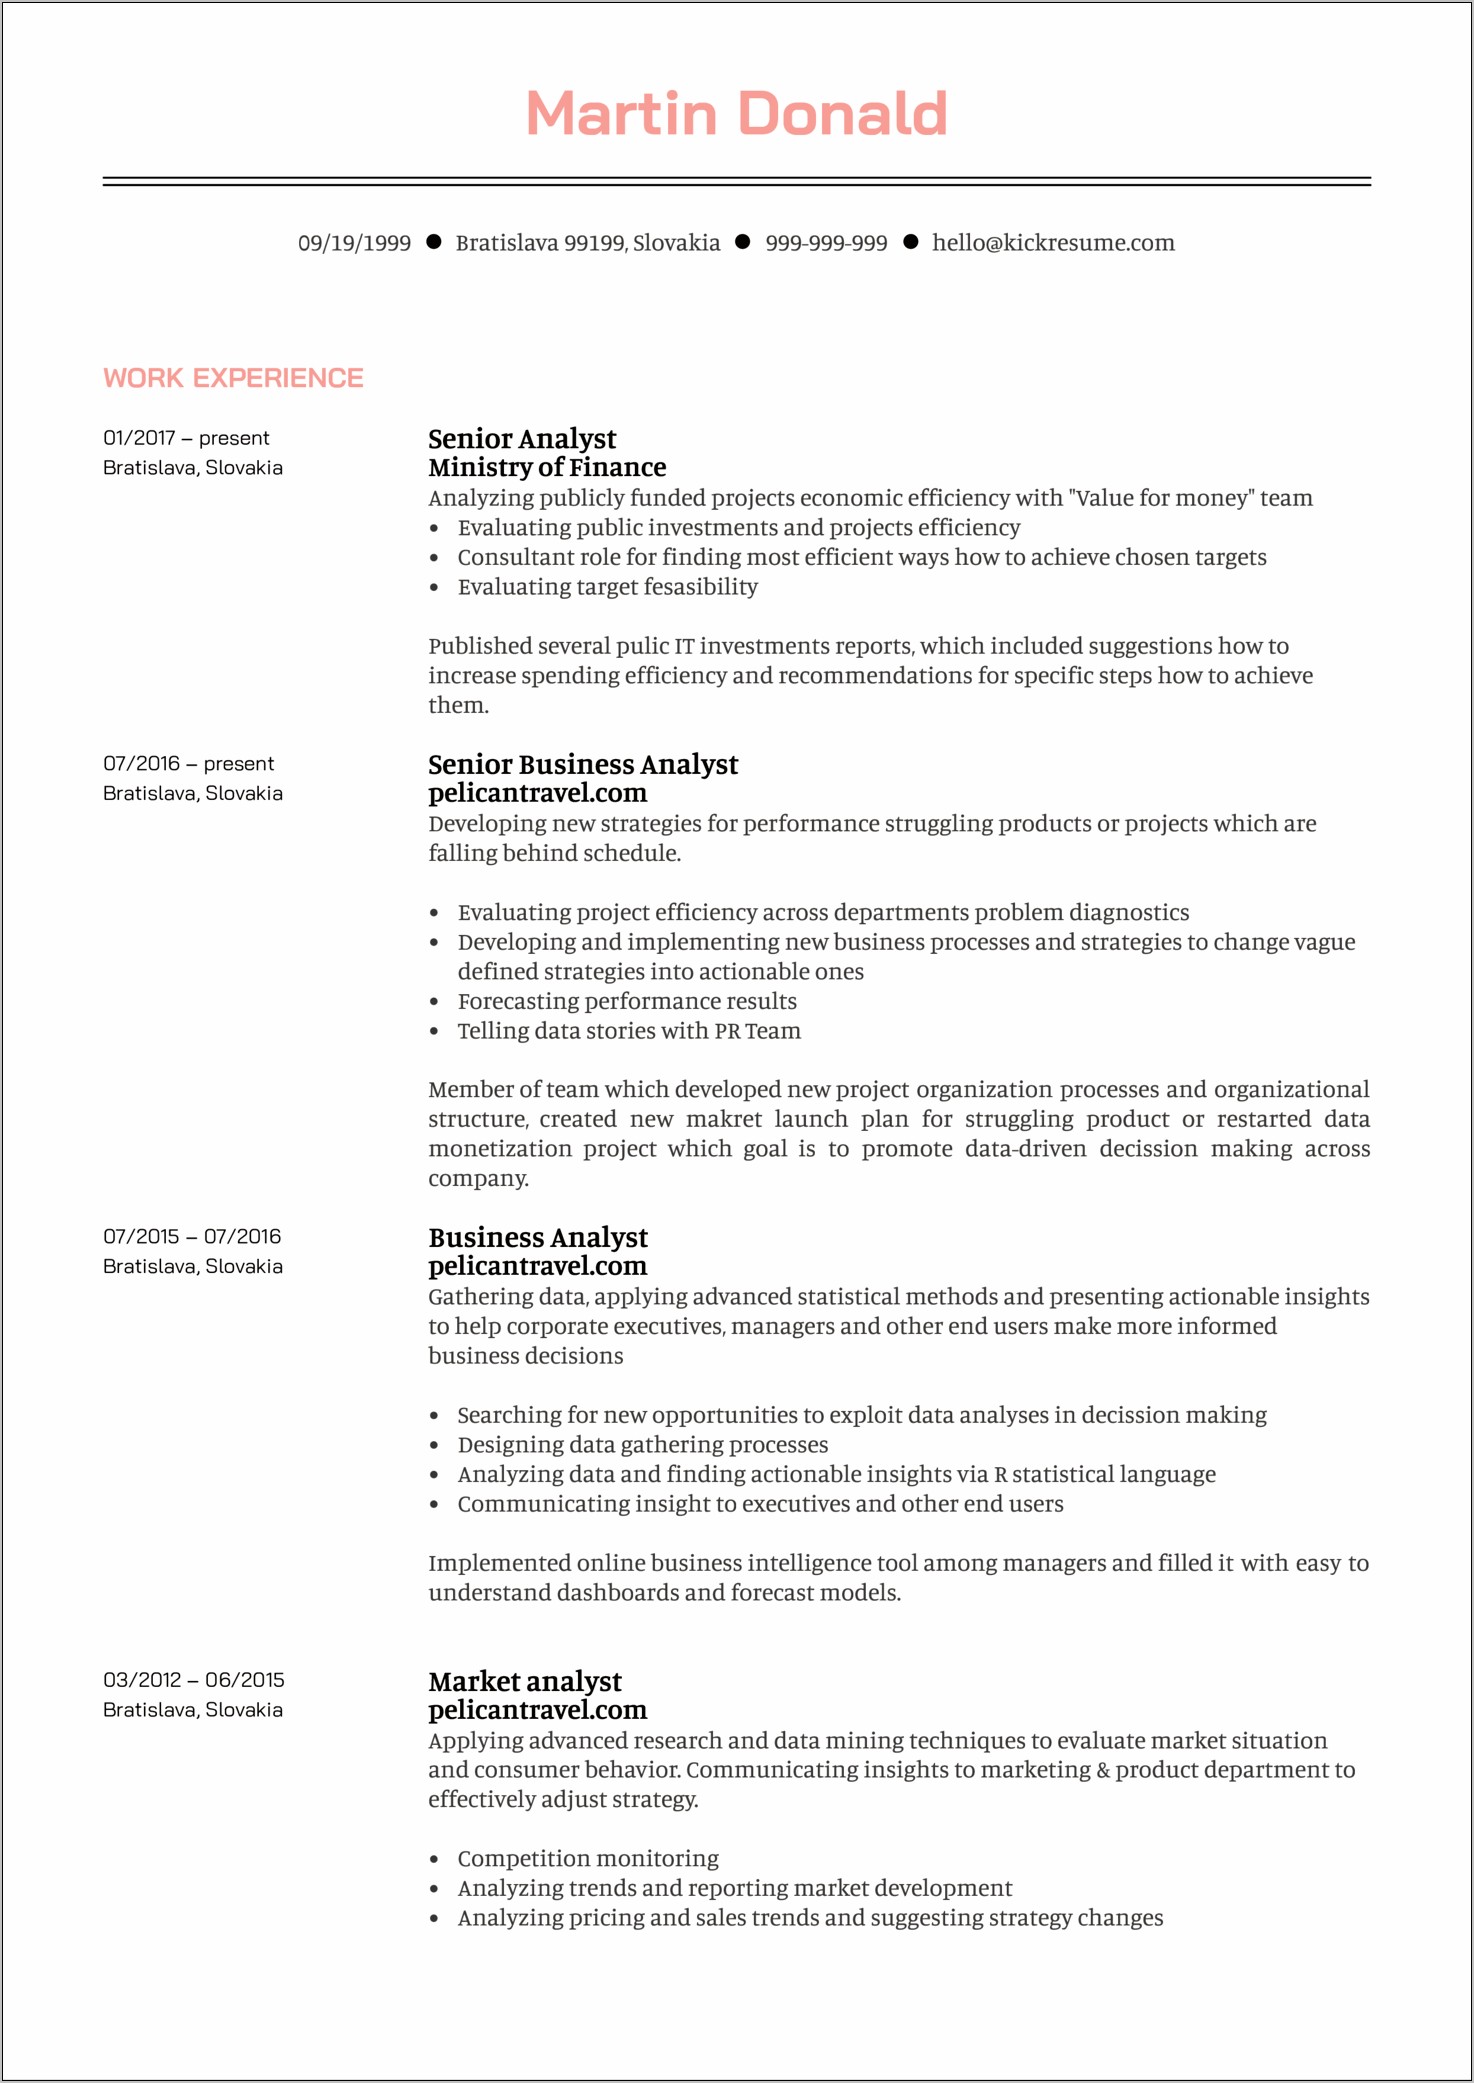 Best Resume Format For Business Analyst